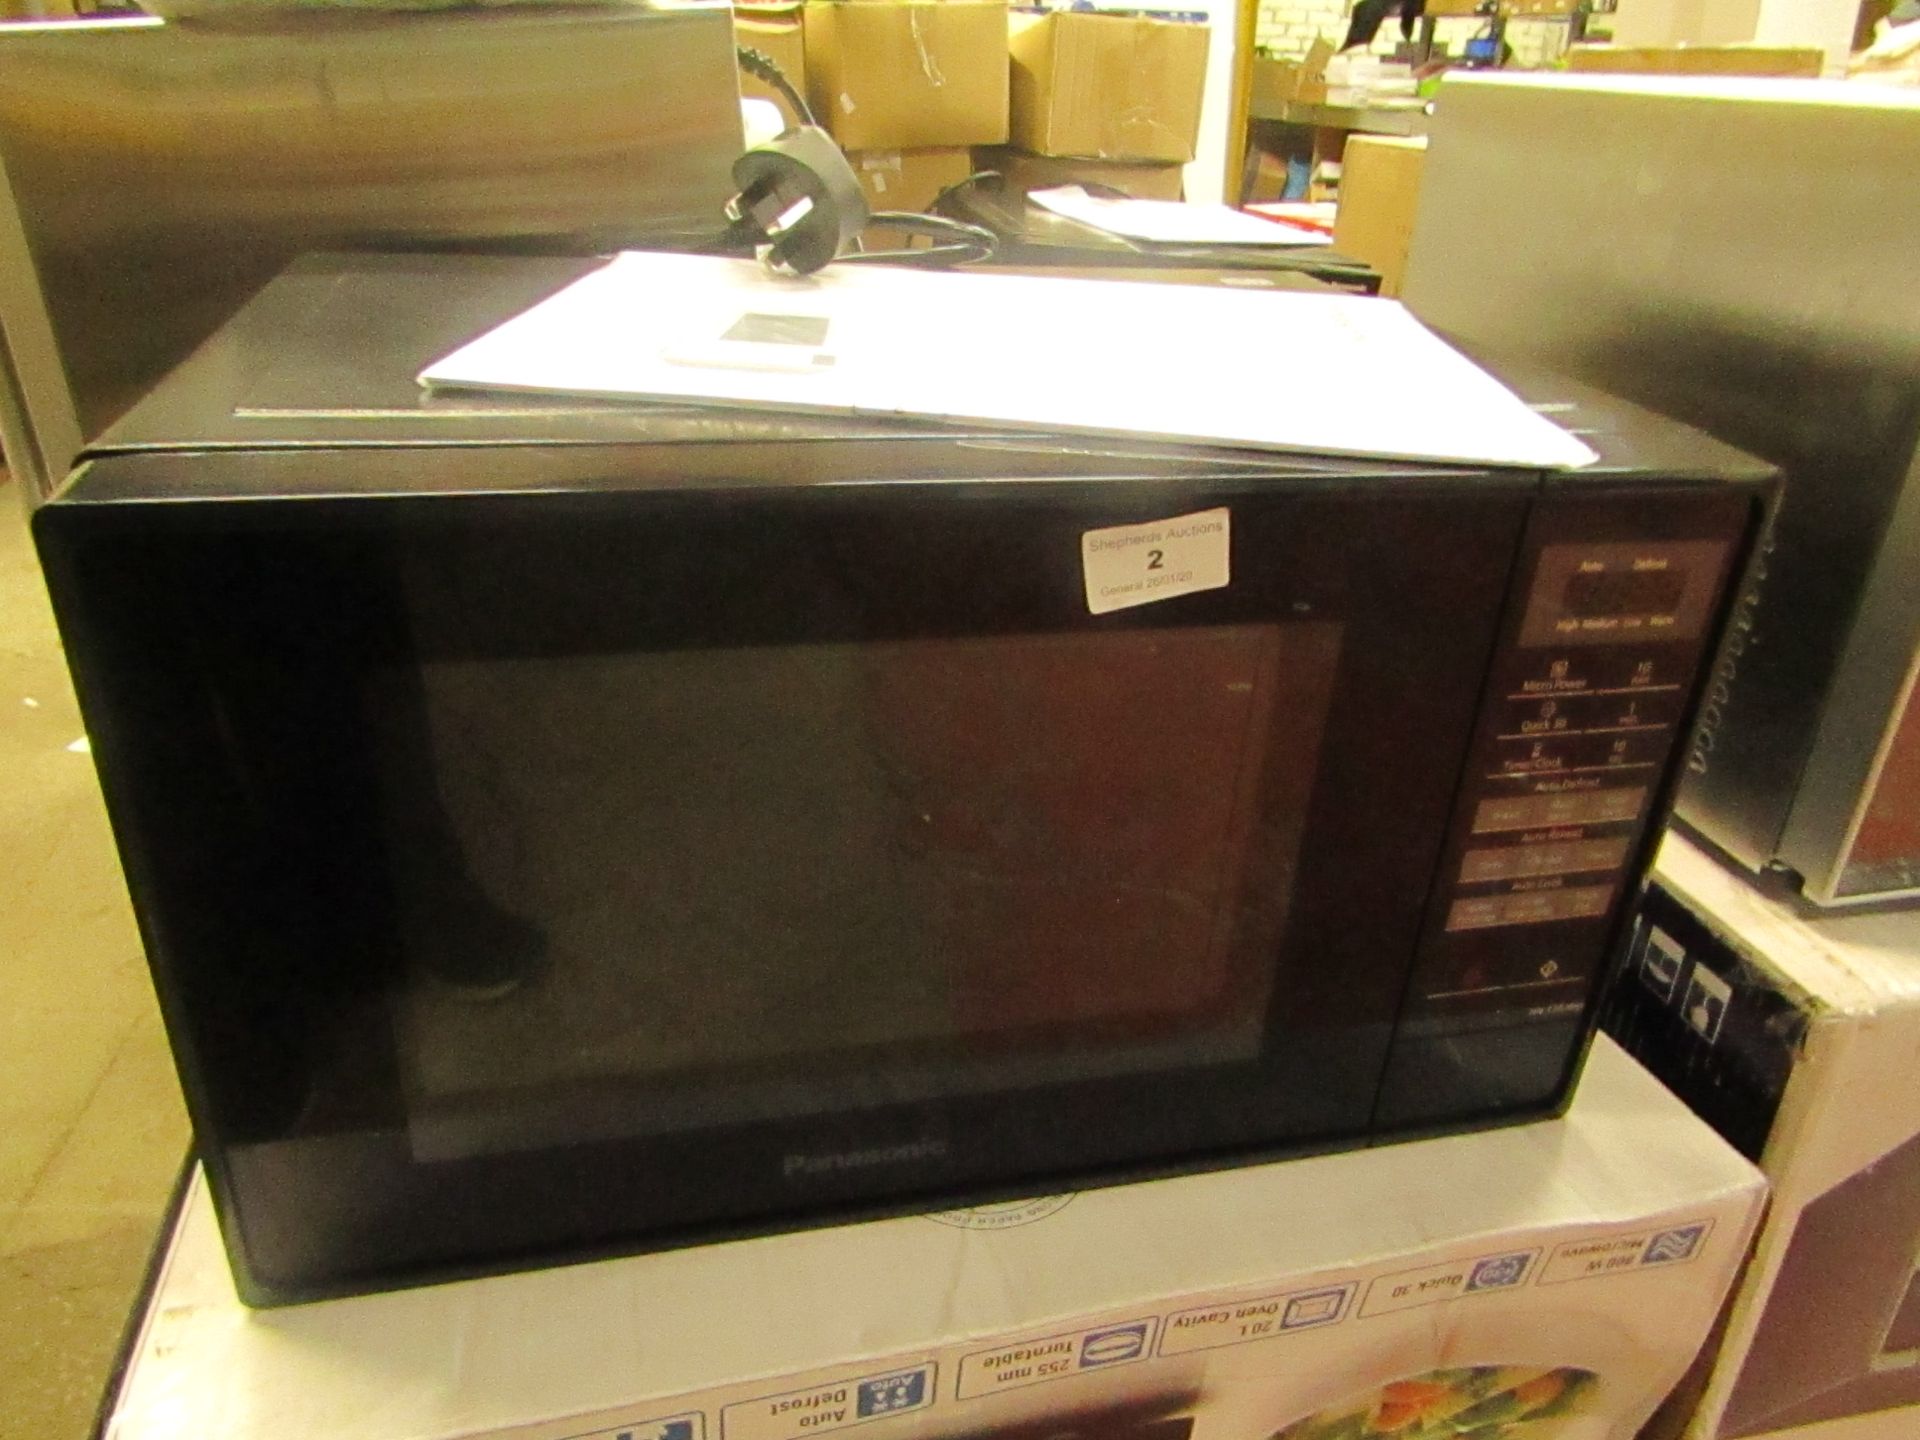 Panasonic E28JBM Microwave Oven. 800w. 20L. Tested working but missing The Plate. Boxed with